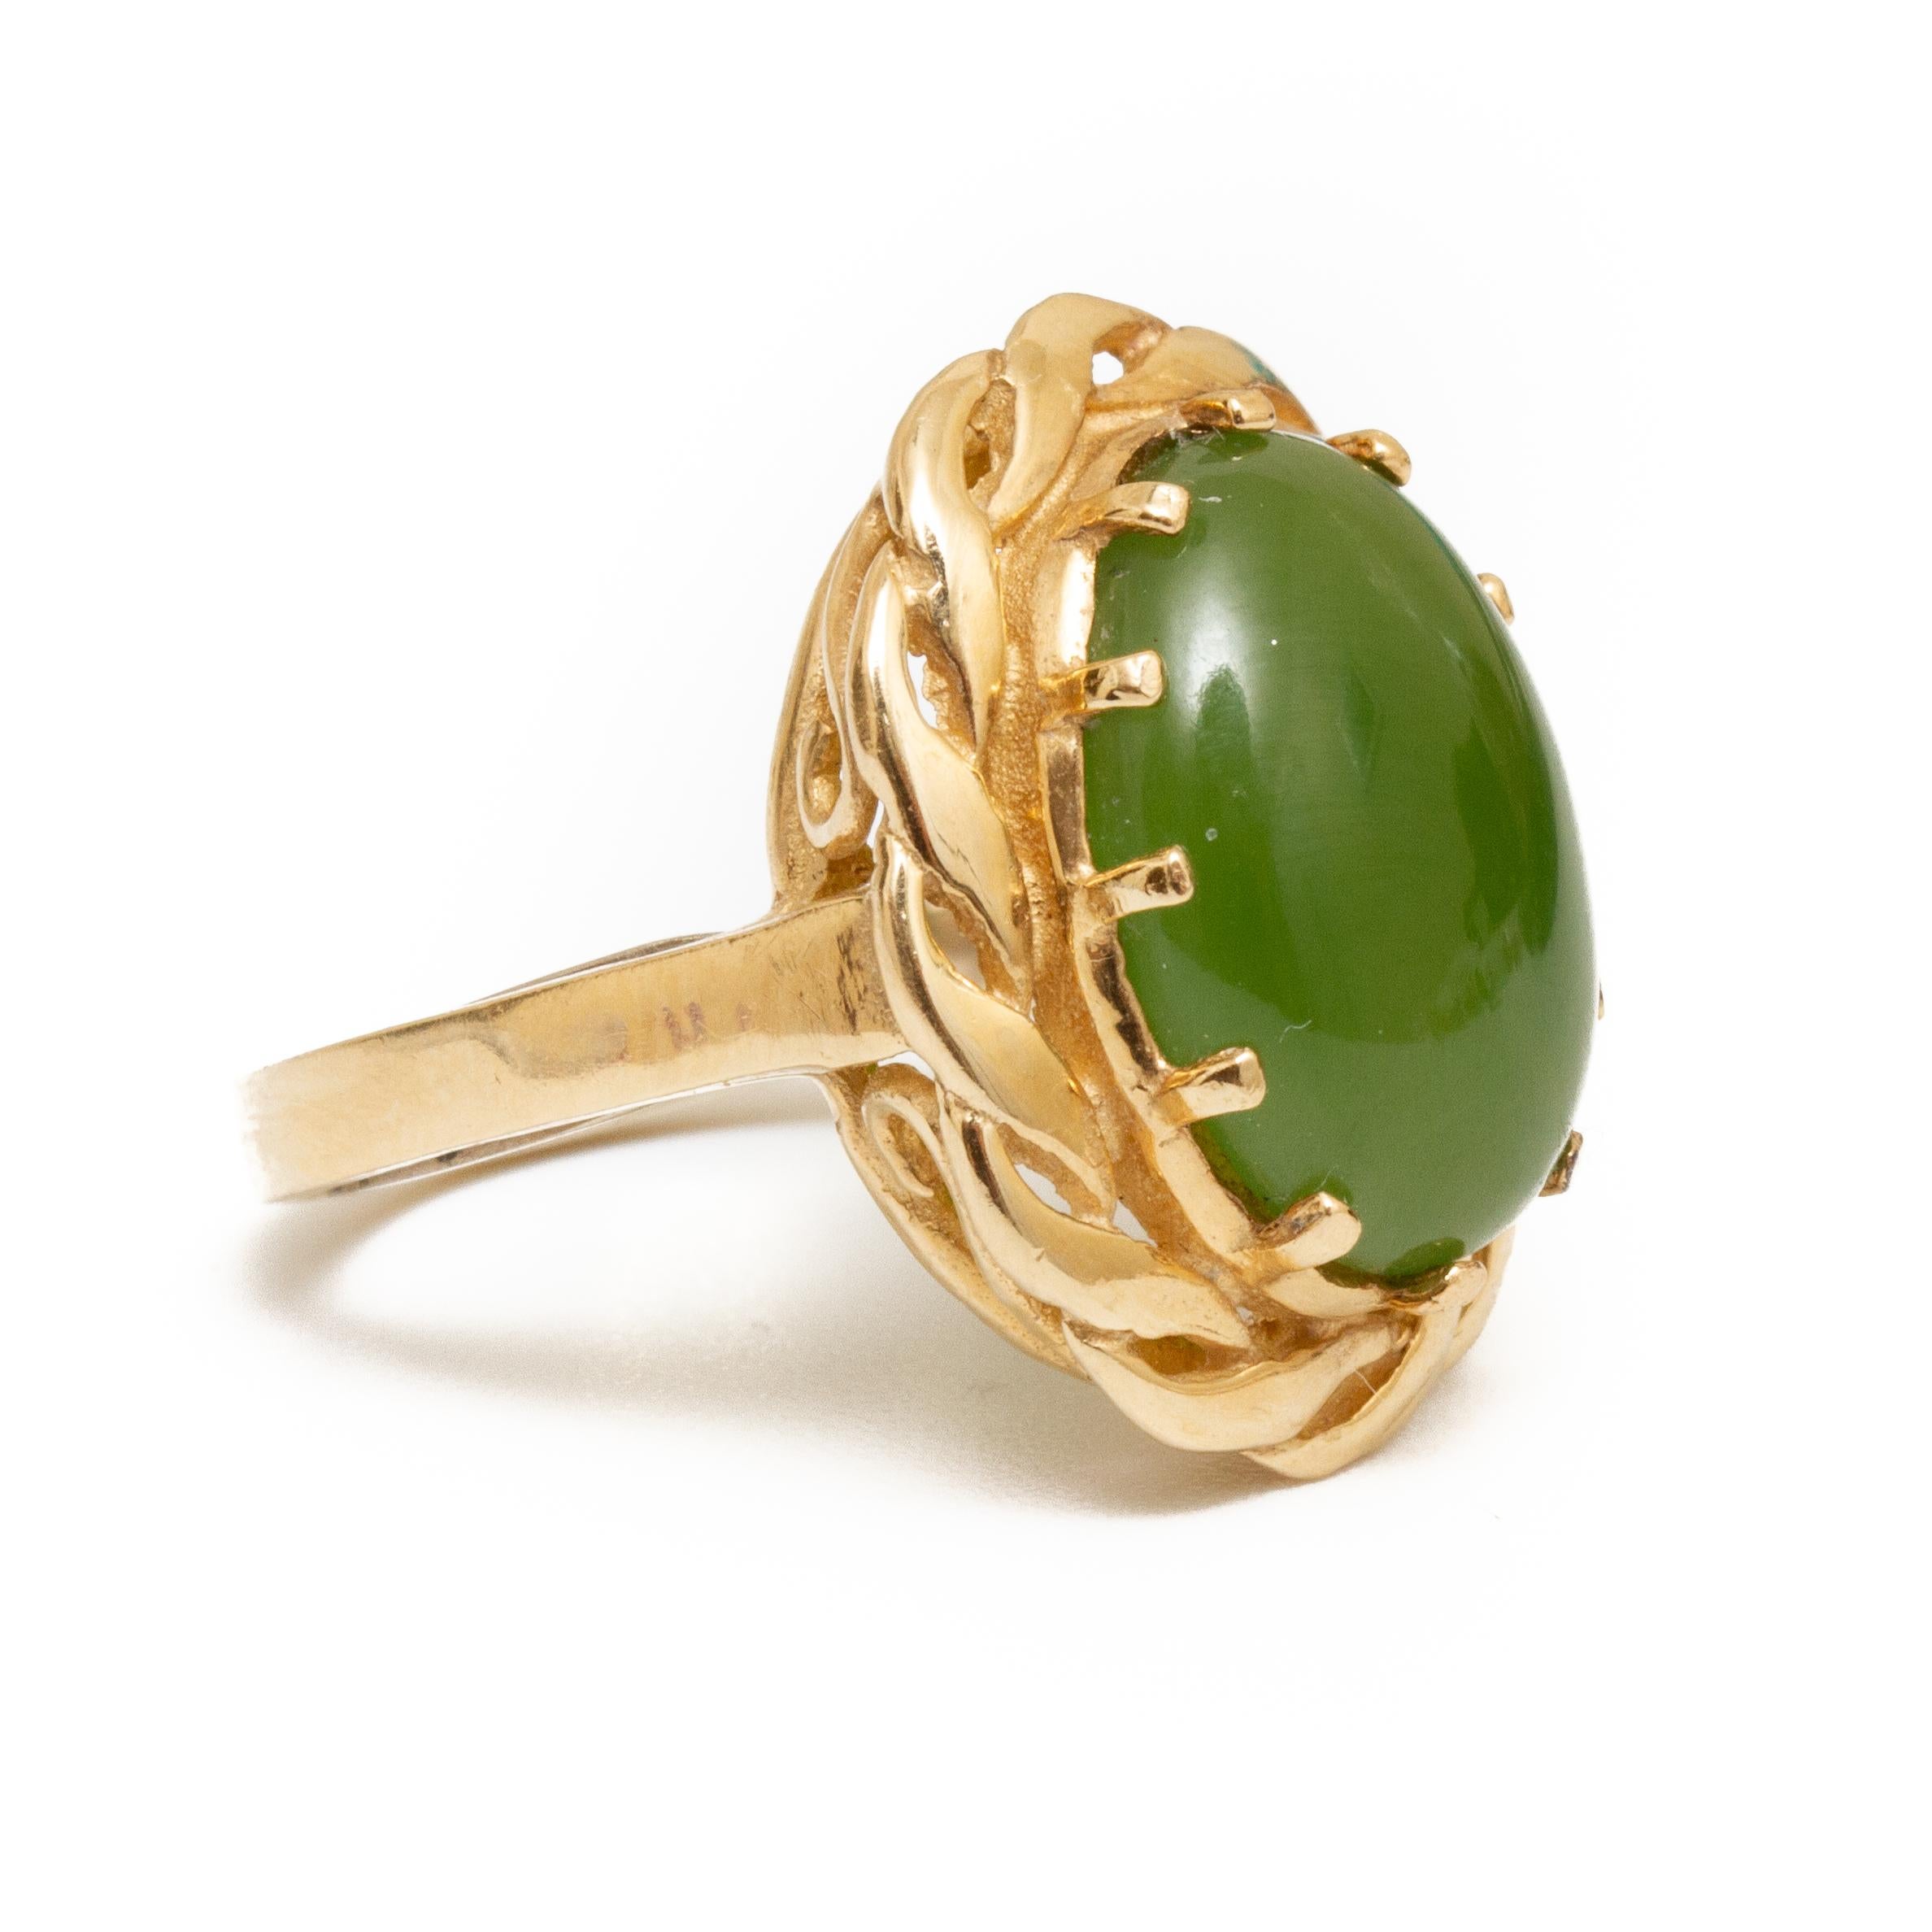 18K gold and jade ring size 4.75. Ring has guard, weighs approx. 3.8 dwt